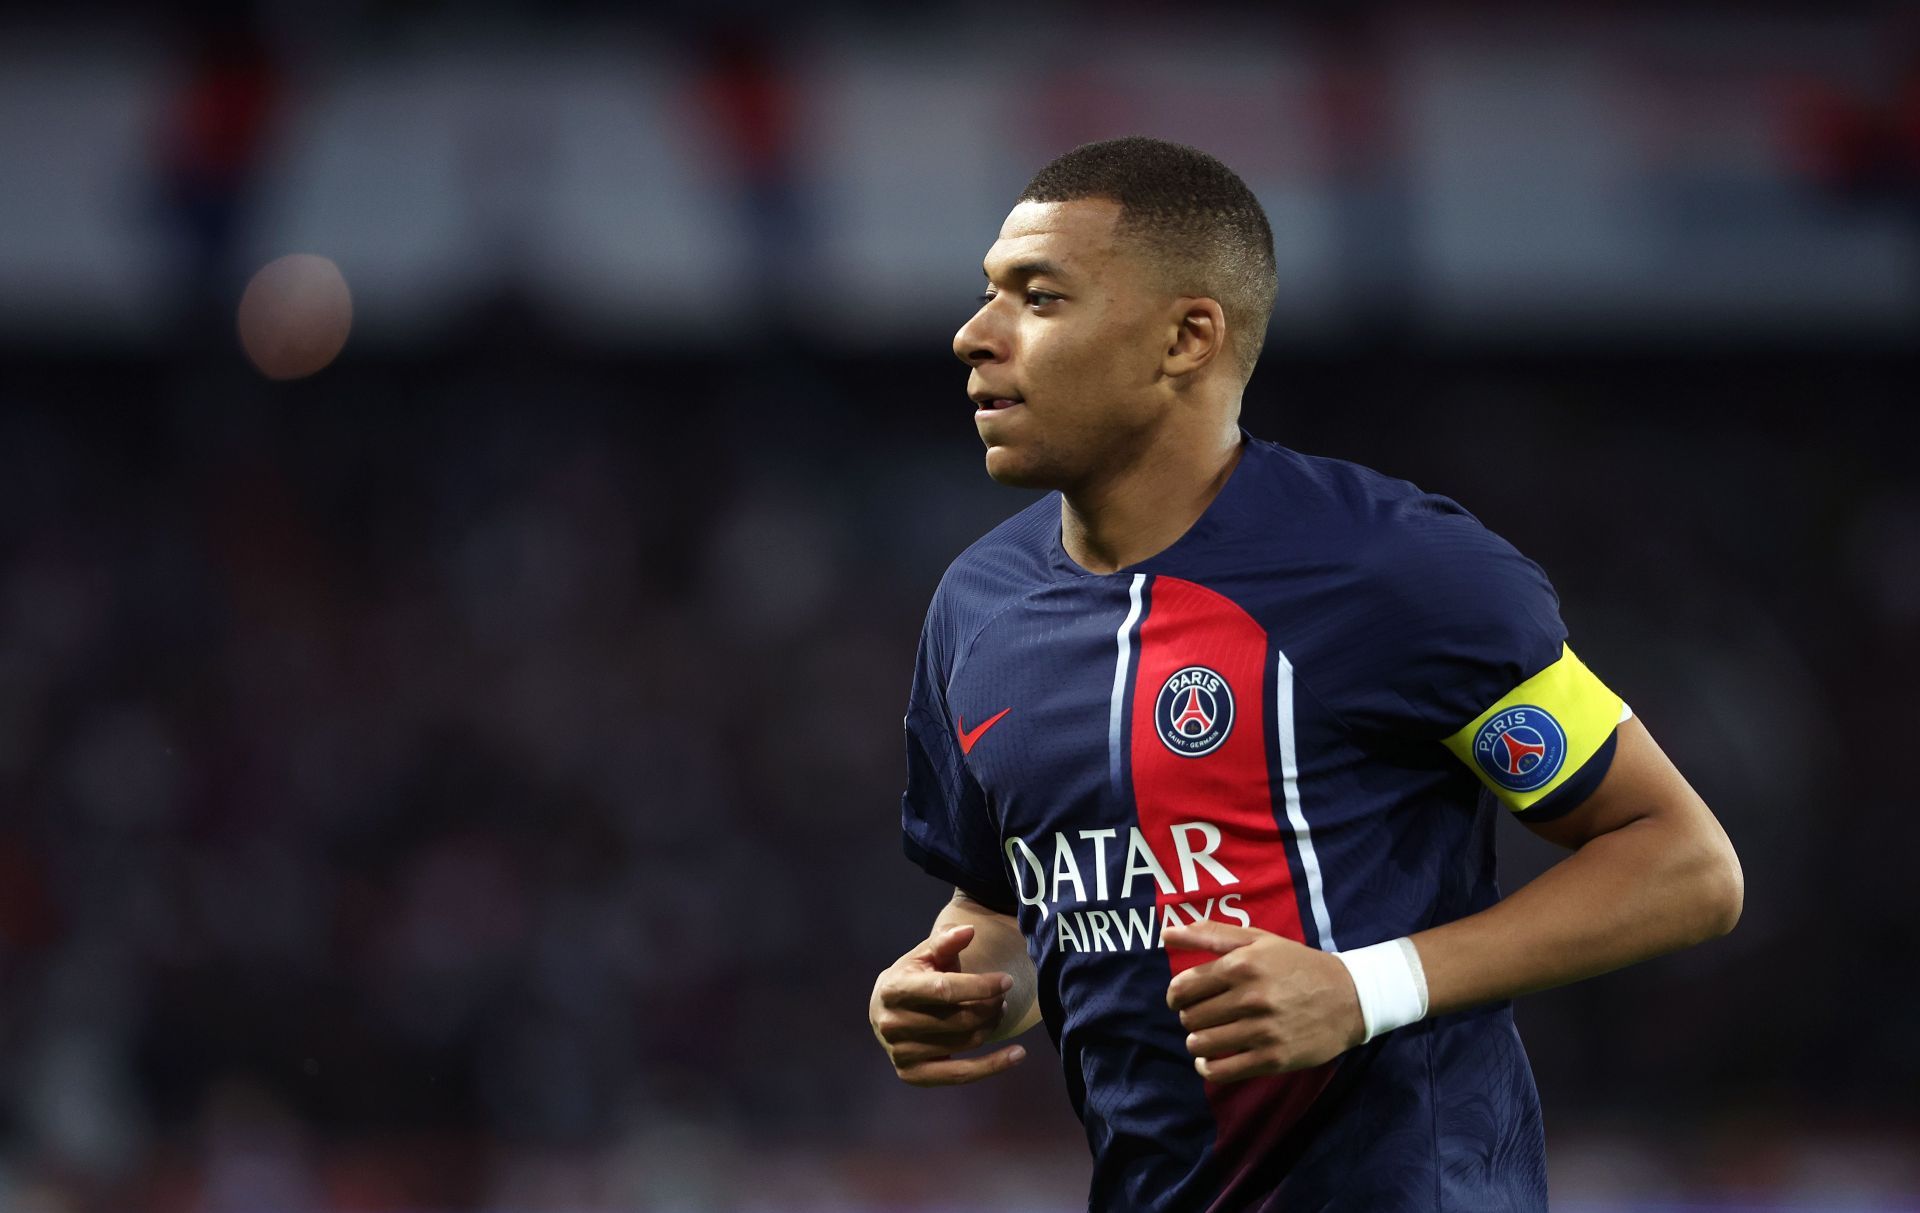 Kylian Mbappe could be on his way to the Santiago Bernabeu.